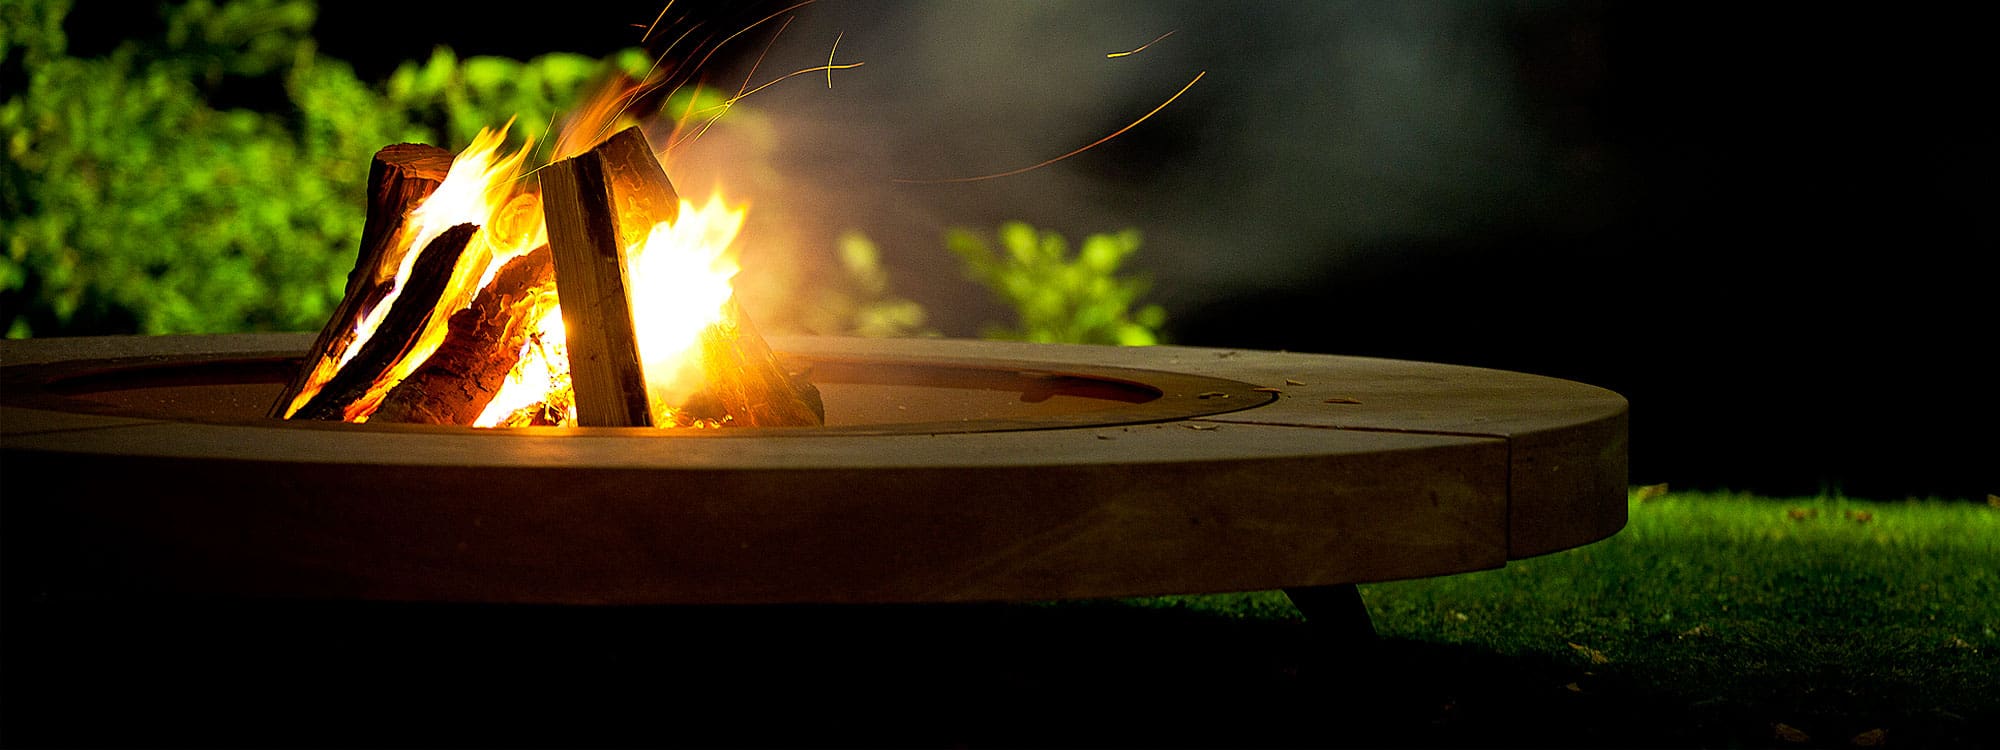 Nighttime image of roaring flames within Rondo fire pit by AK47 Design